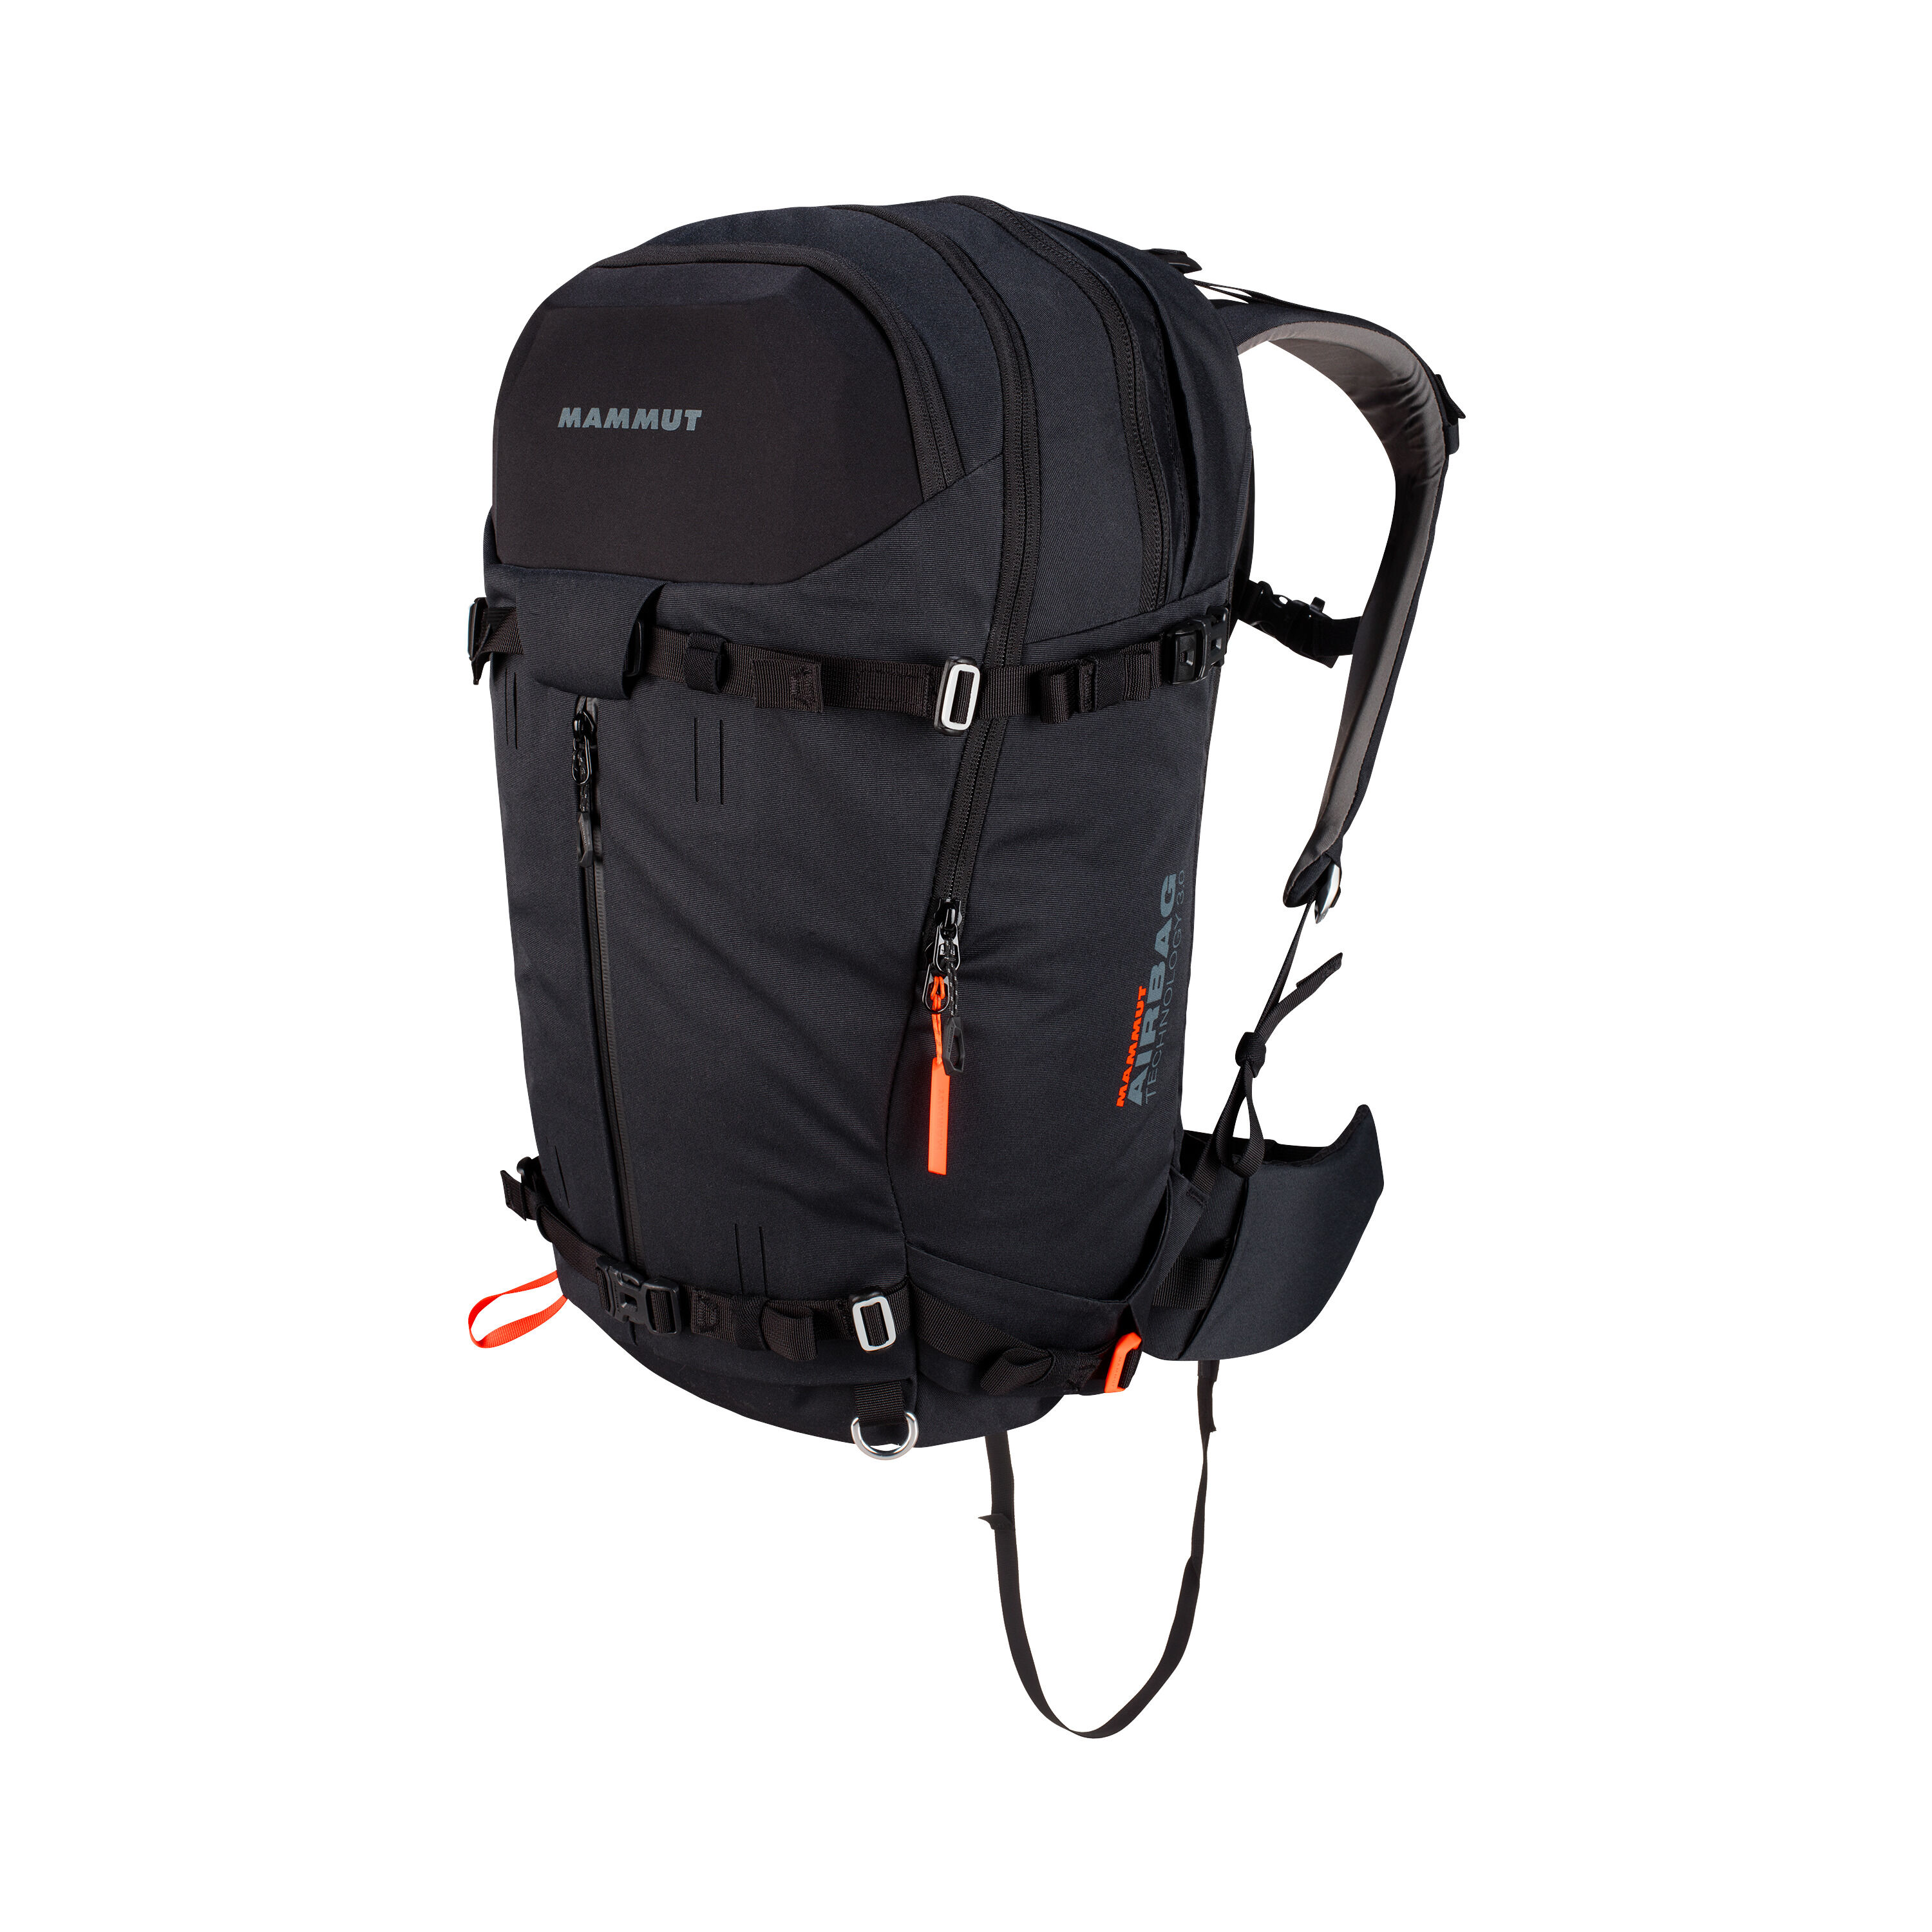 Mammut Pro X Removable Airbag 3.0 - Avalanche backpack